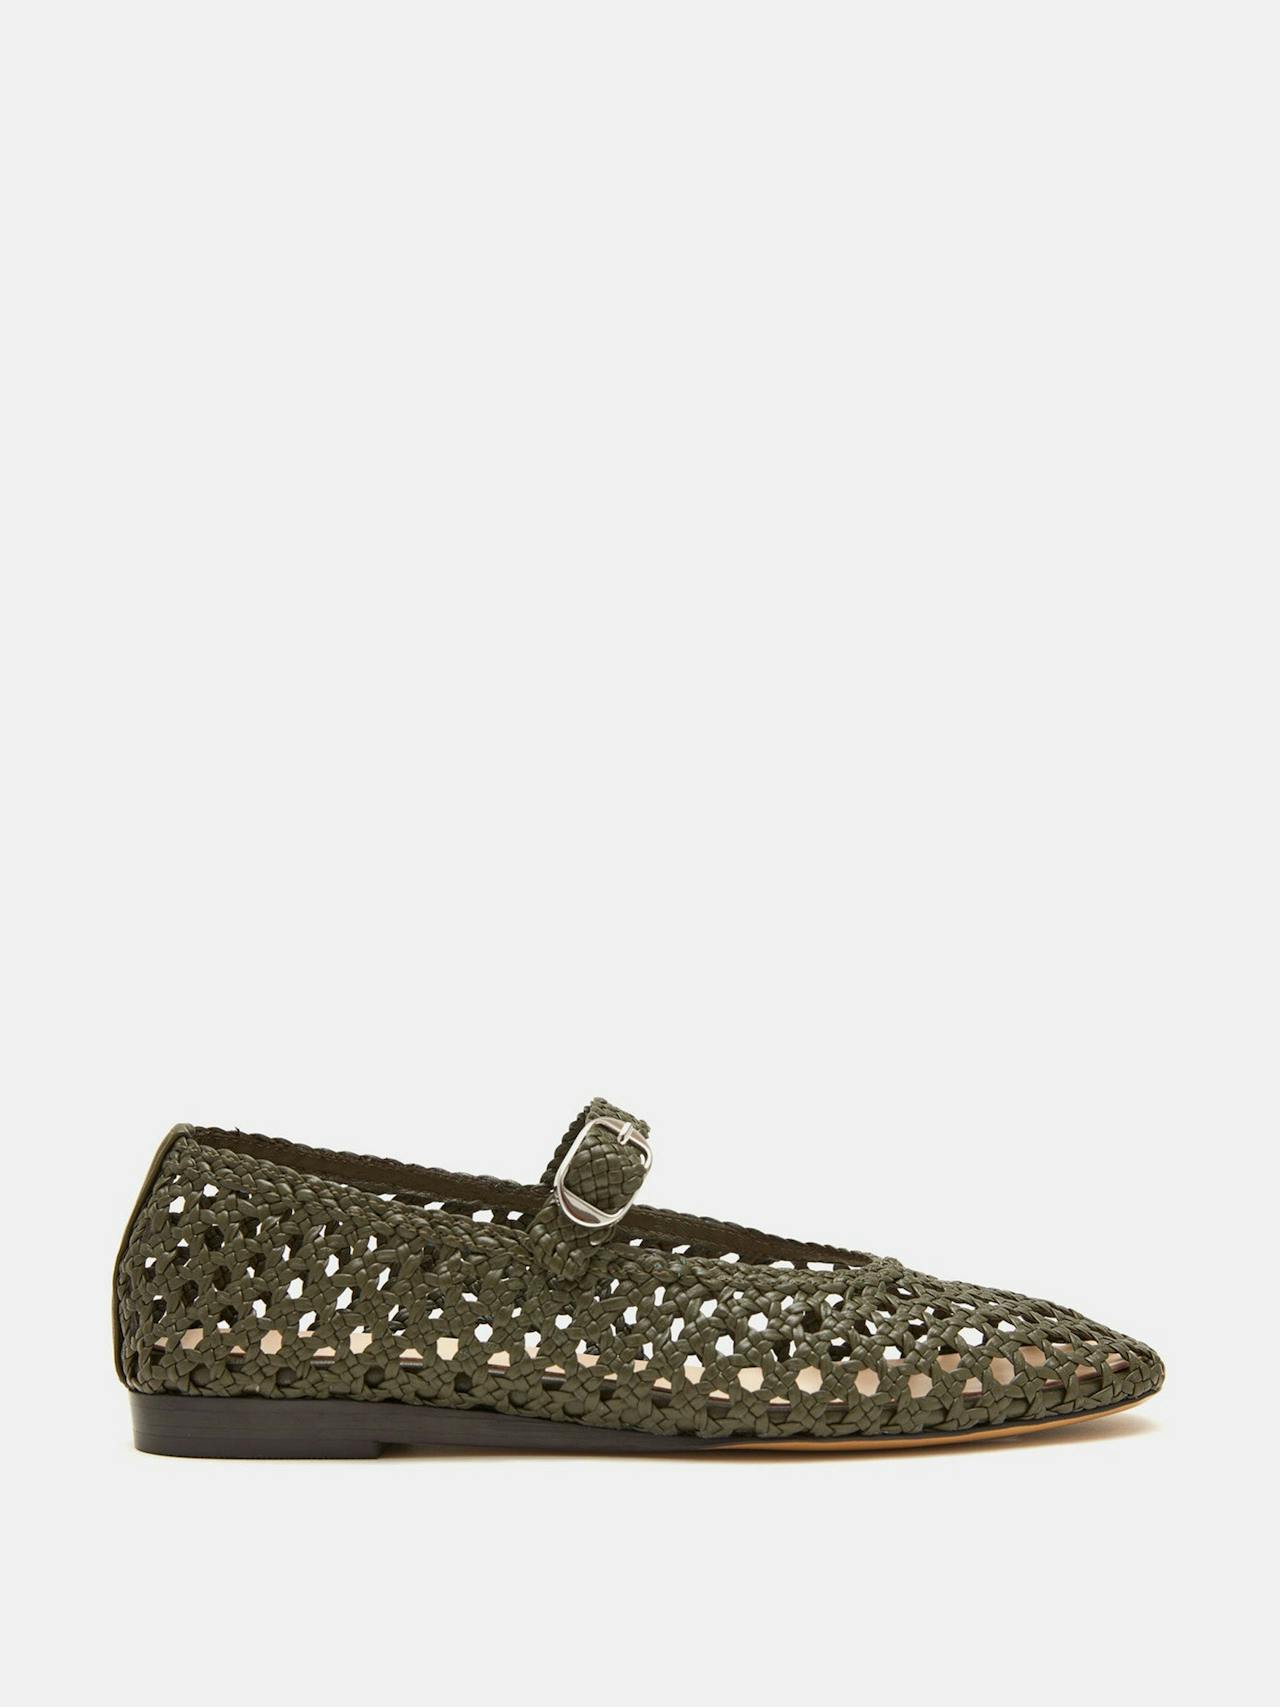 Green leather woven Mary Jane flats